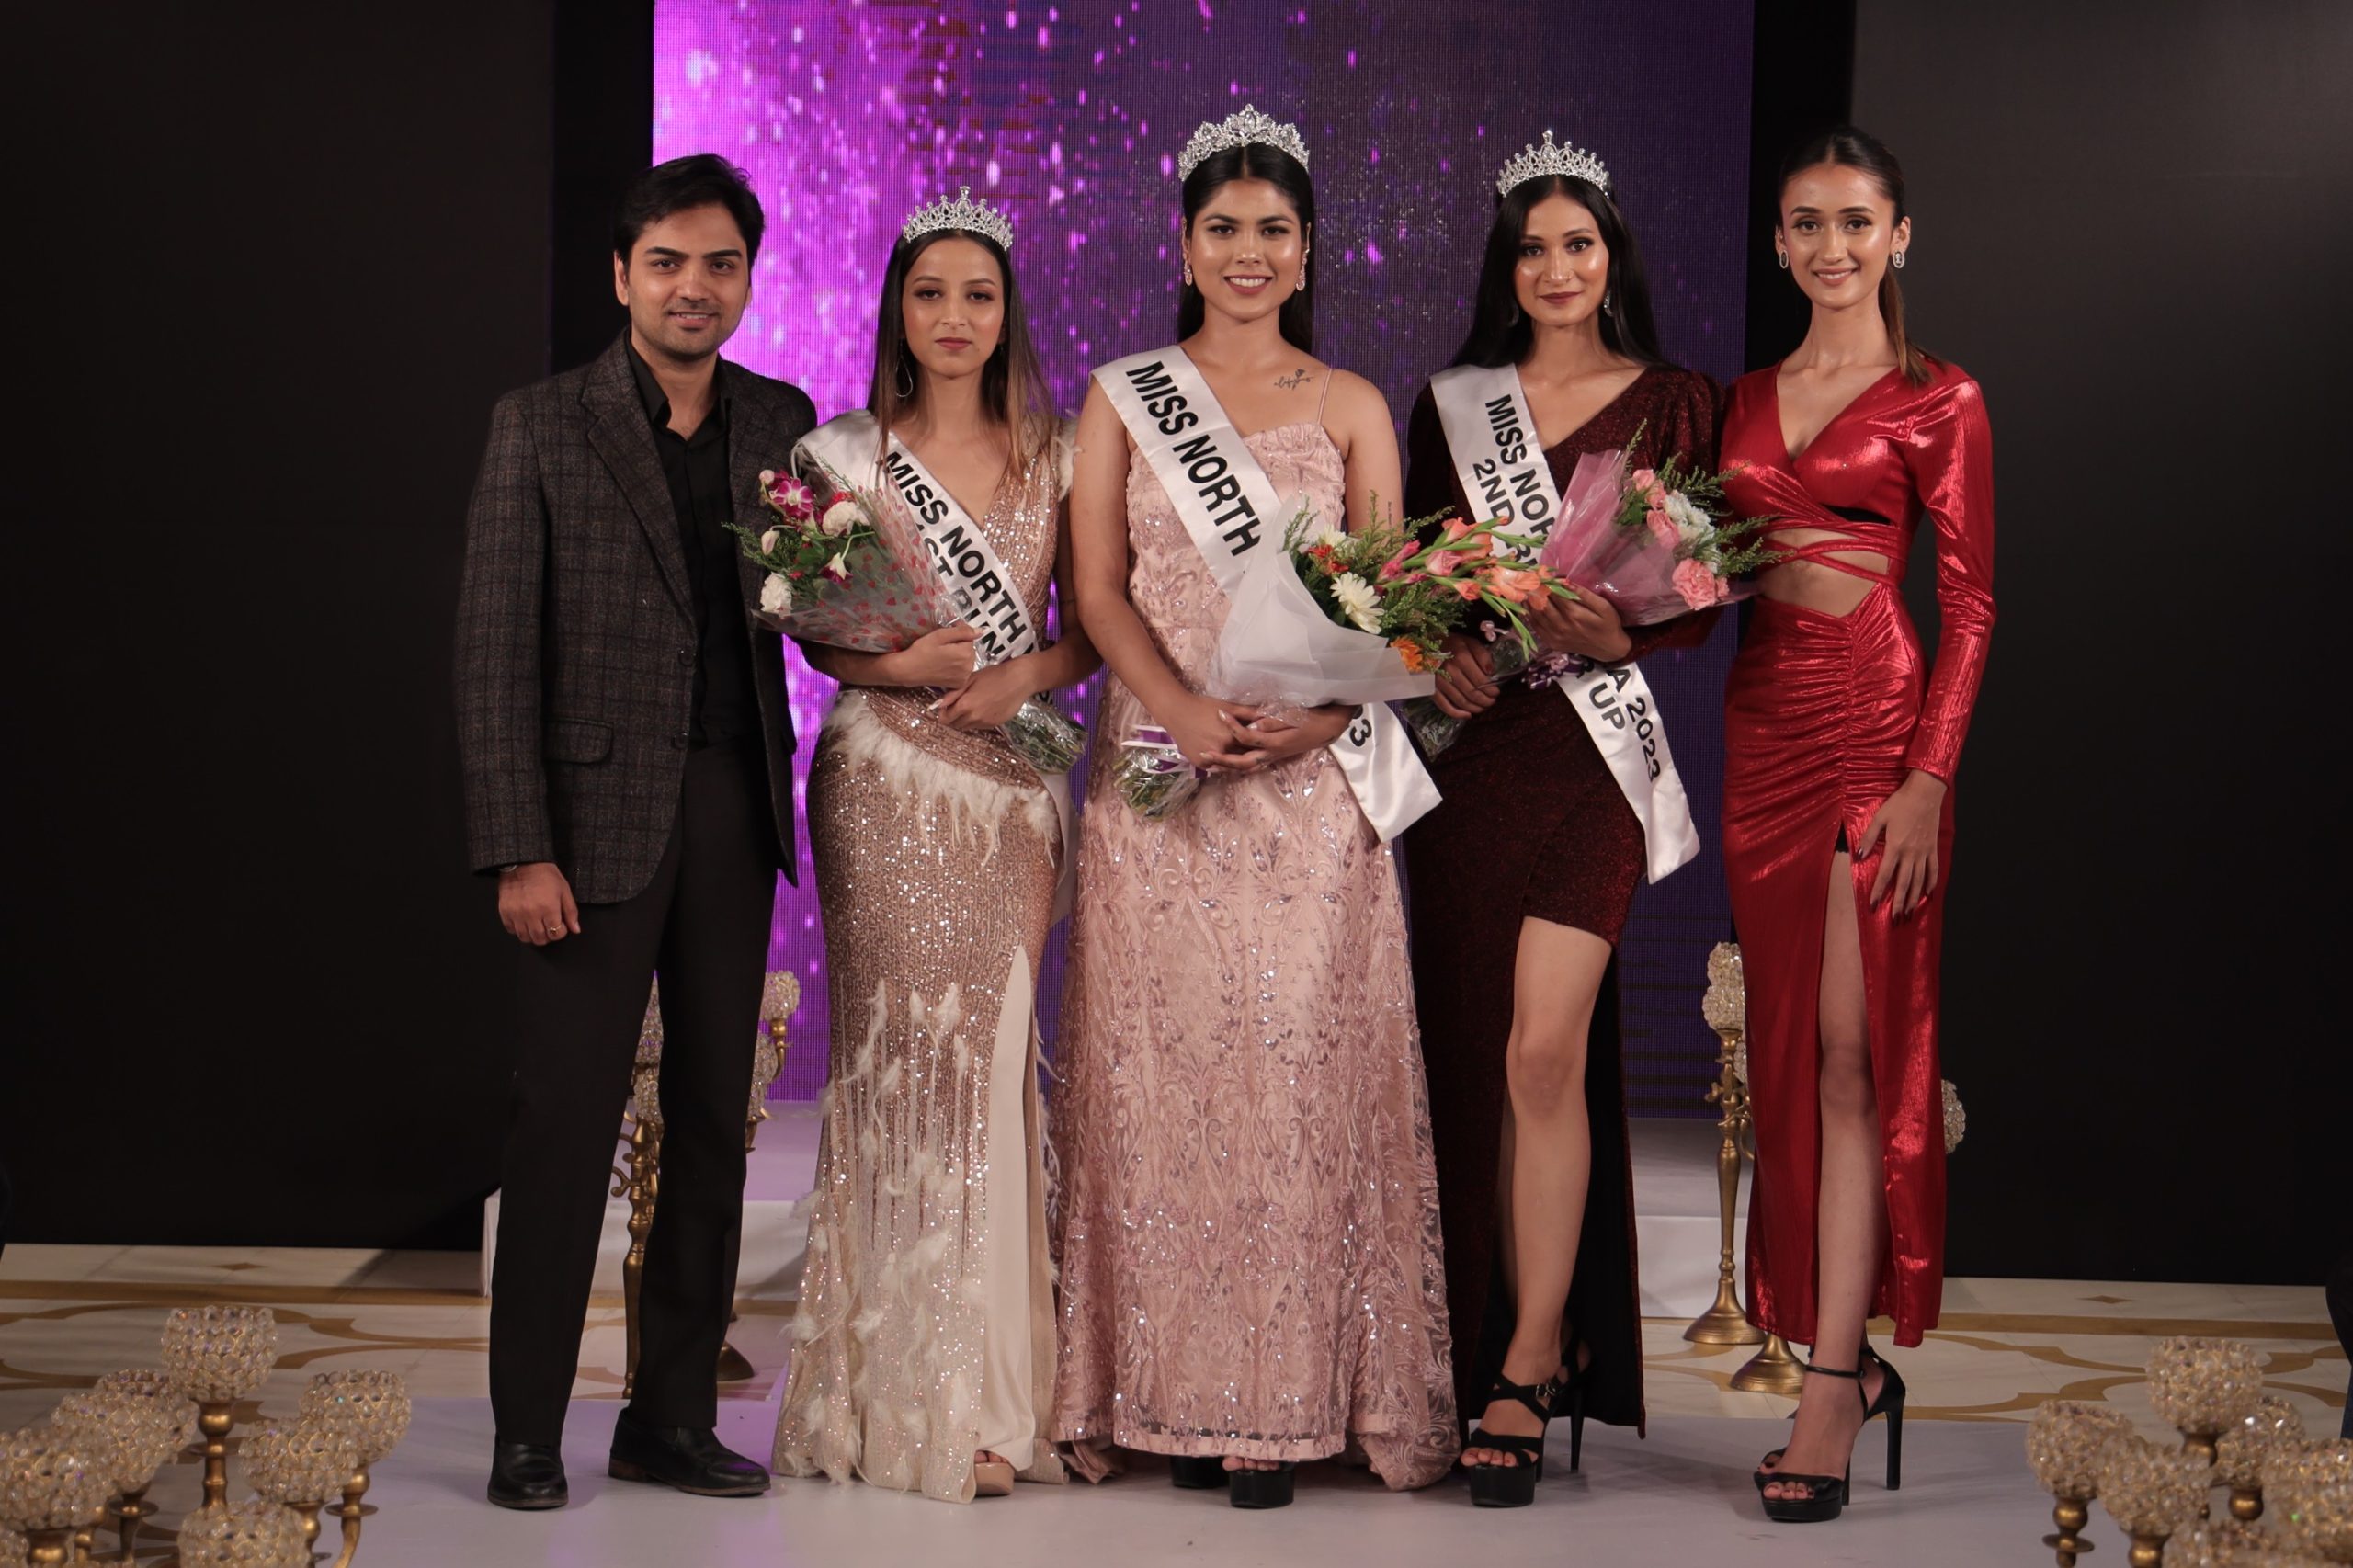 Simran Chaudhary Won The Title of “Miss North India 2023